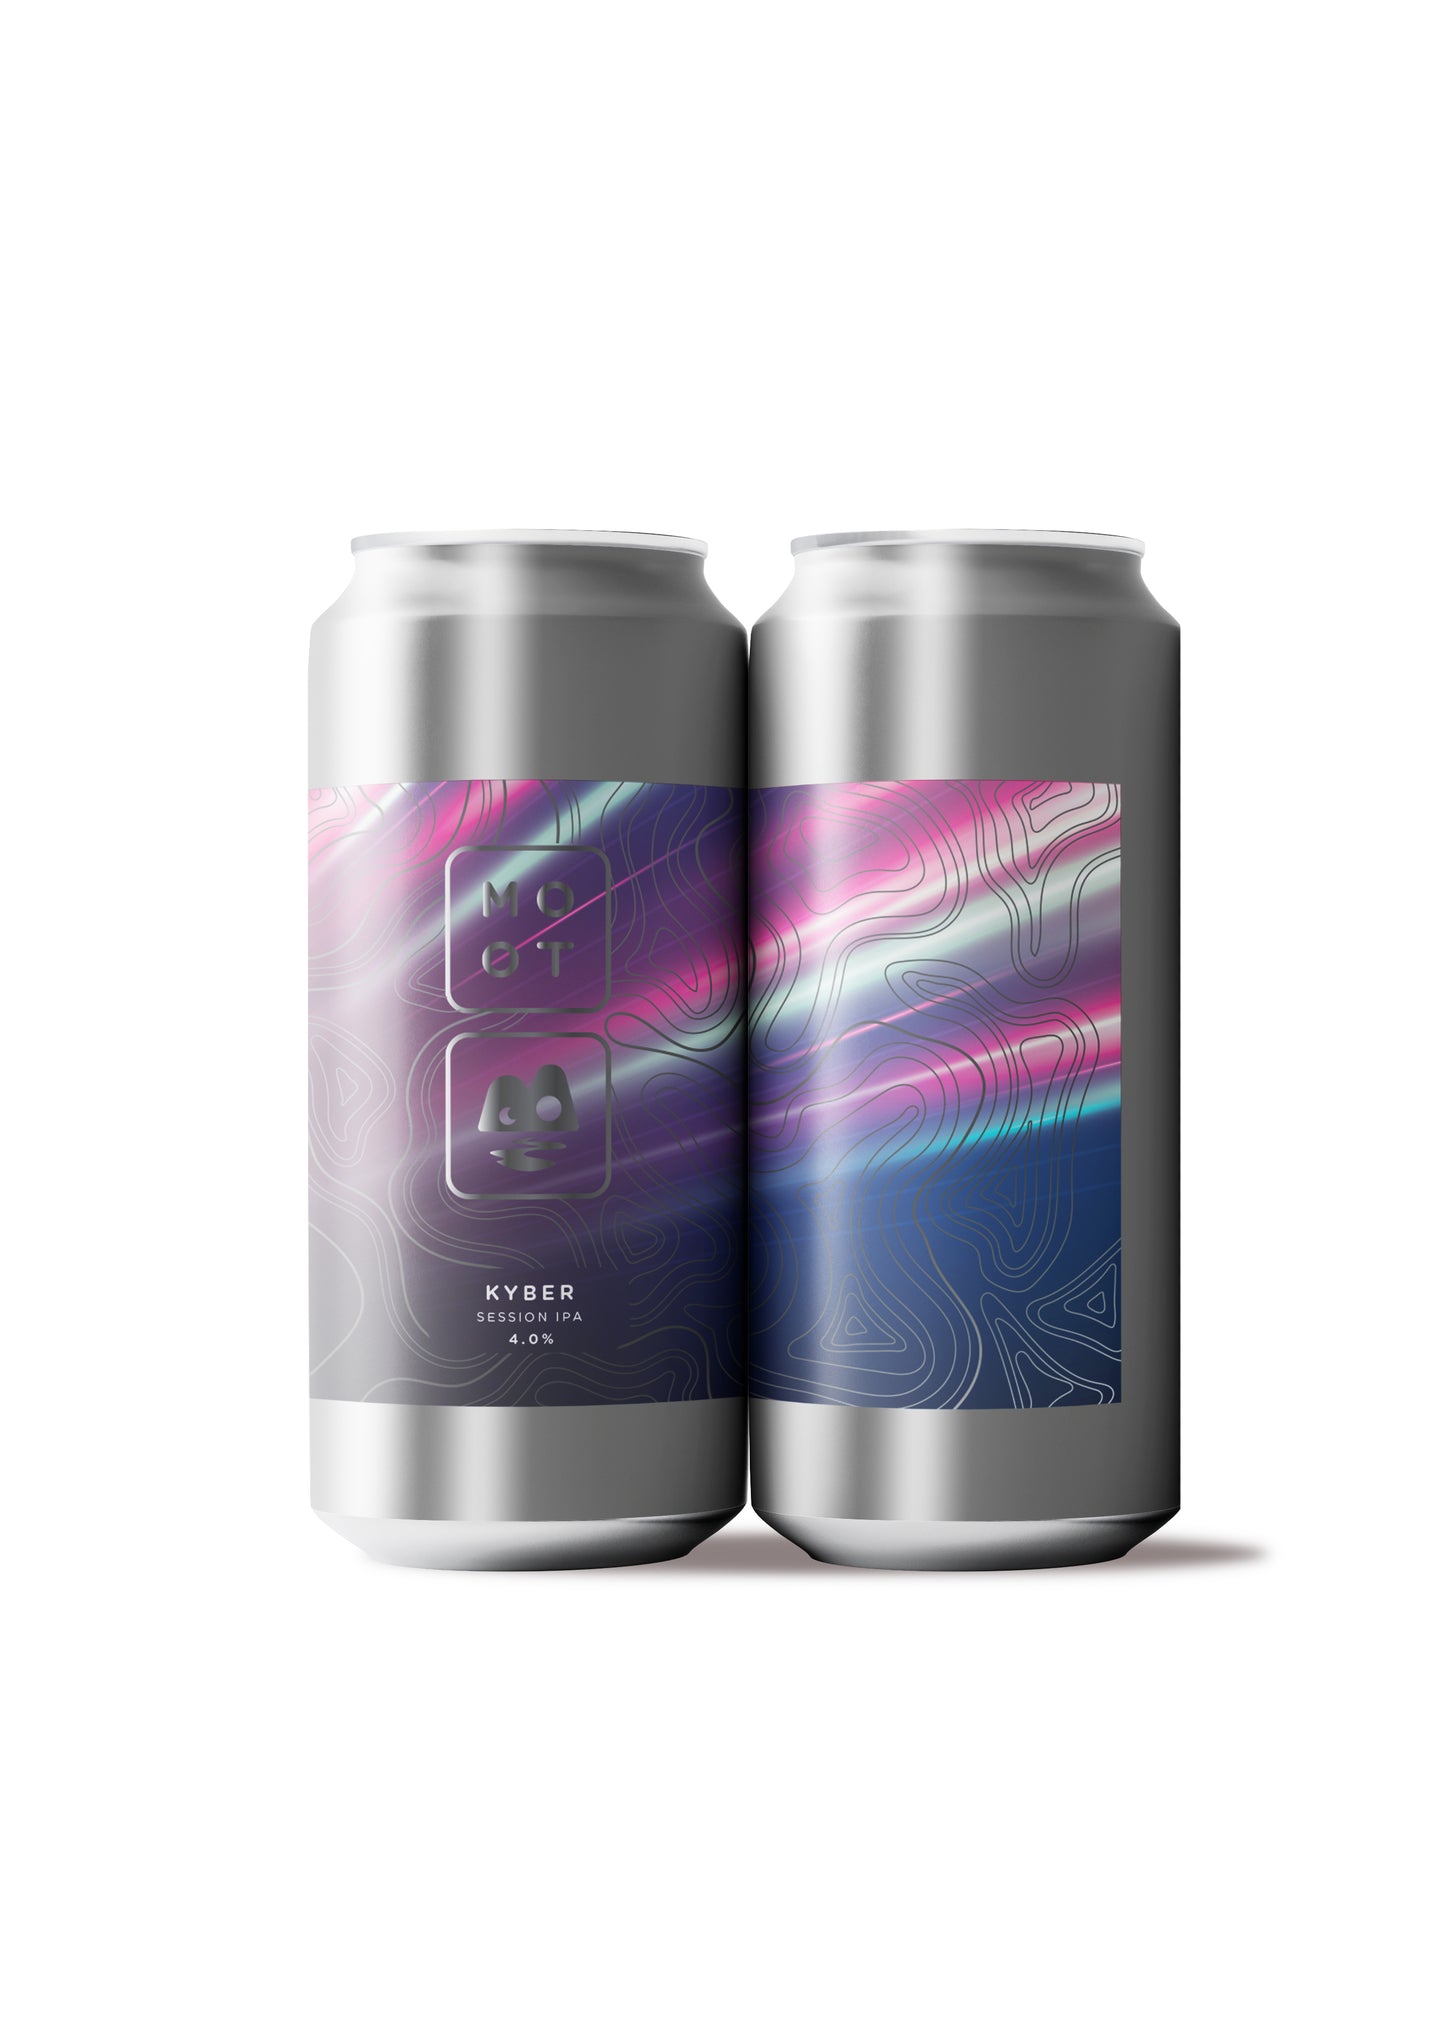 Kyber - Session IPA 4%